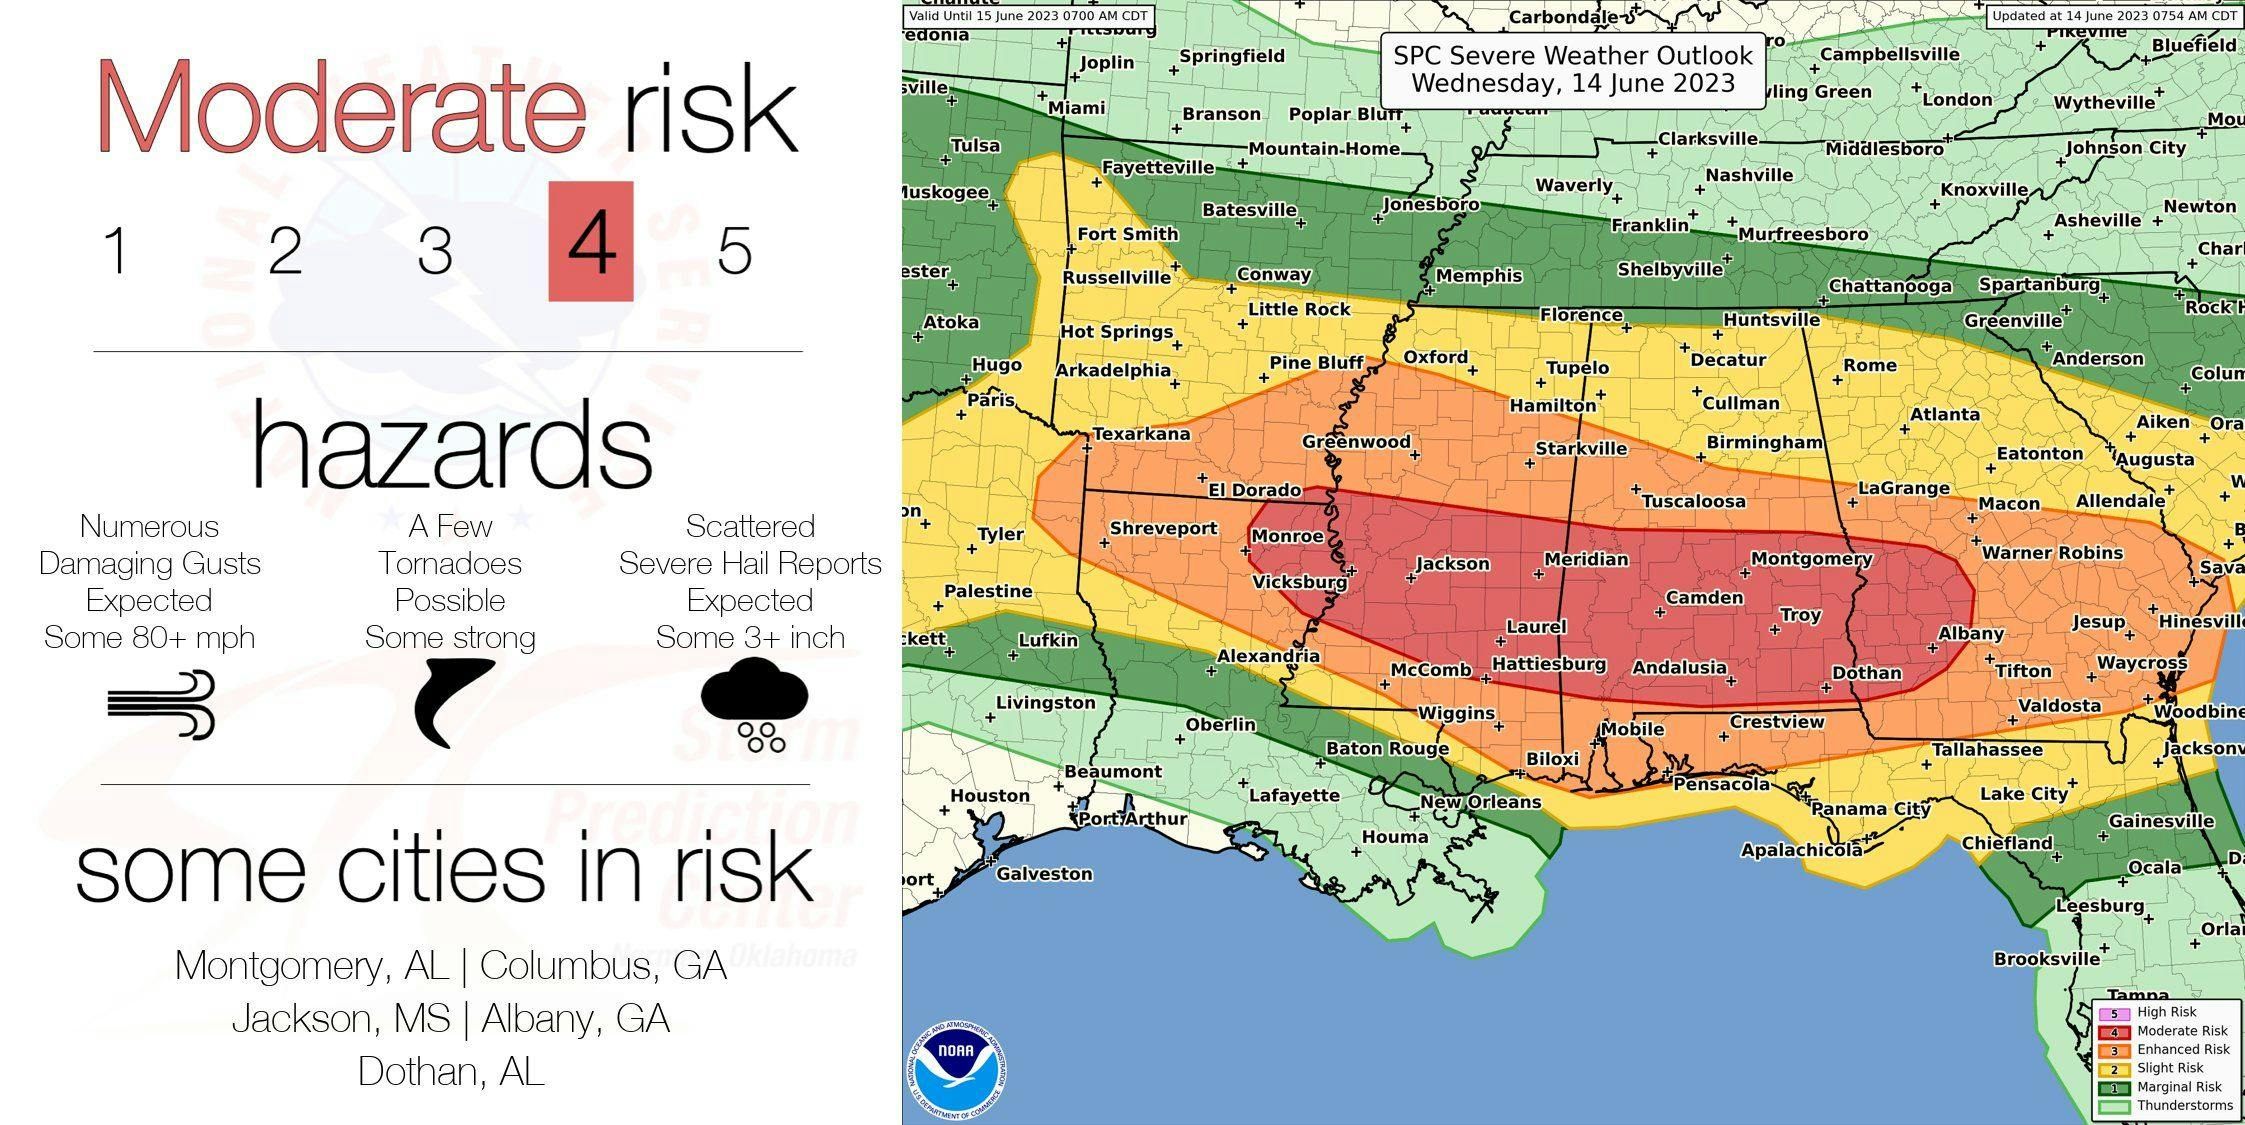 Today's severe risk